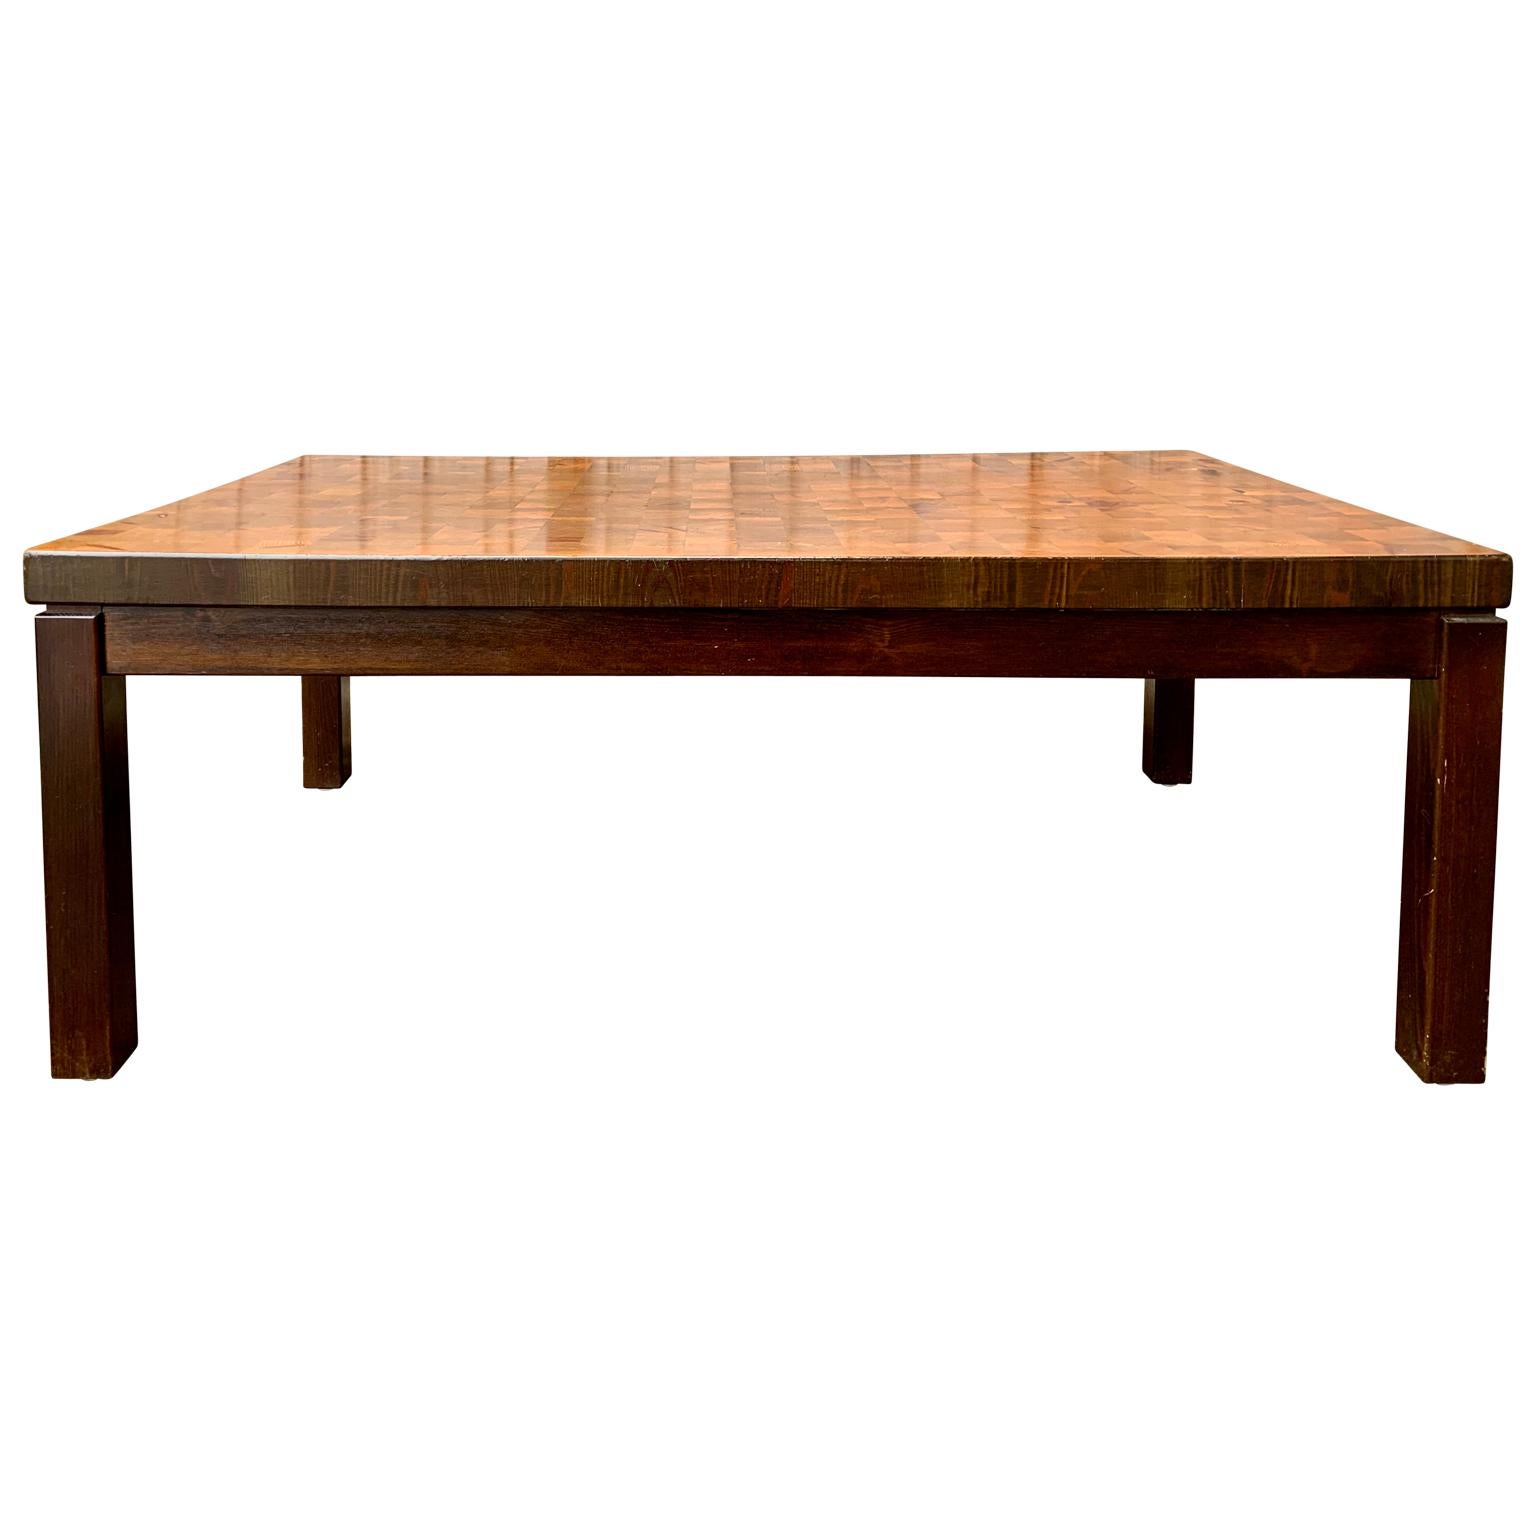 Swedish Mid-Century Modern Rectangular Cocktail Table in Pine In Good Condition For Sale In Haddonfield, NJ